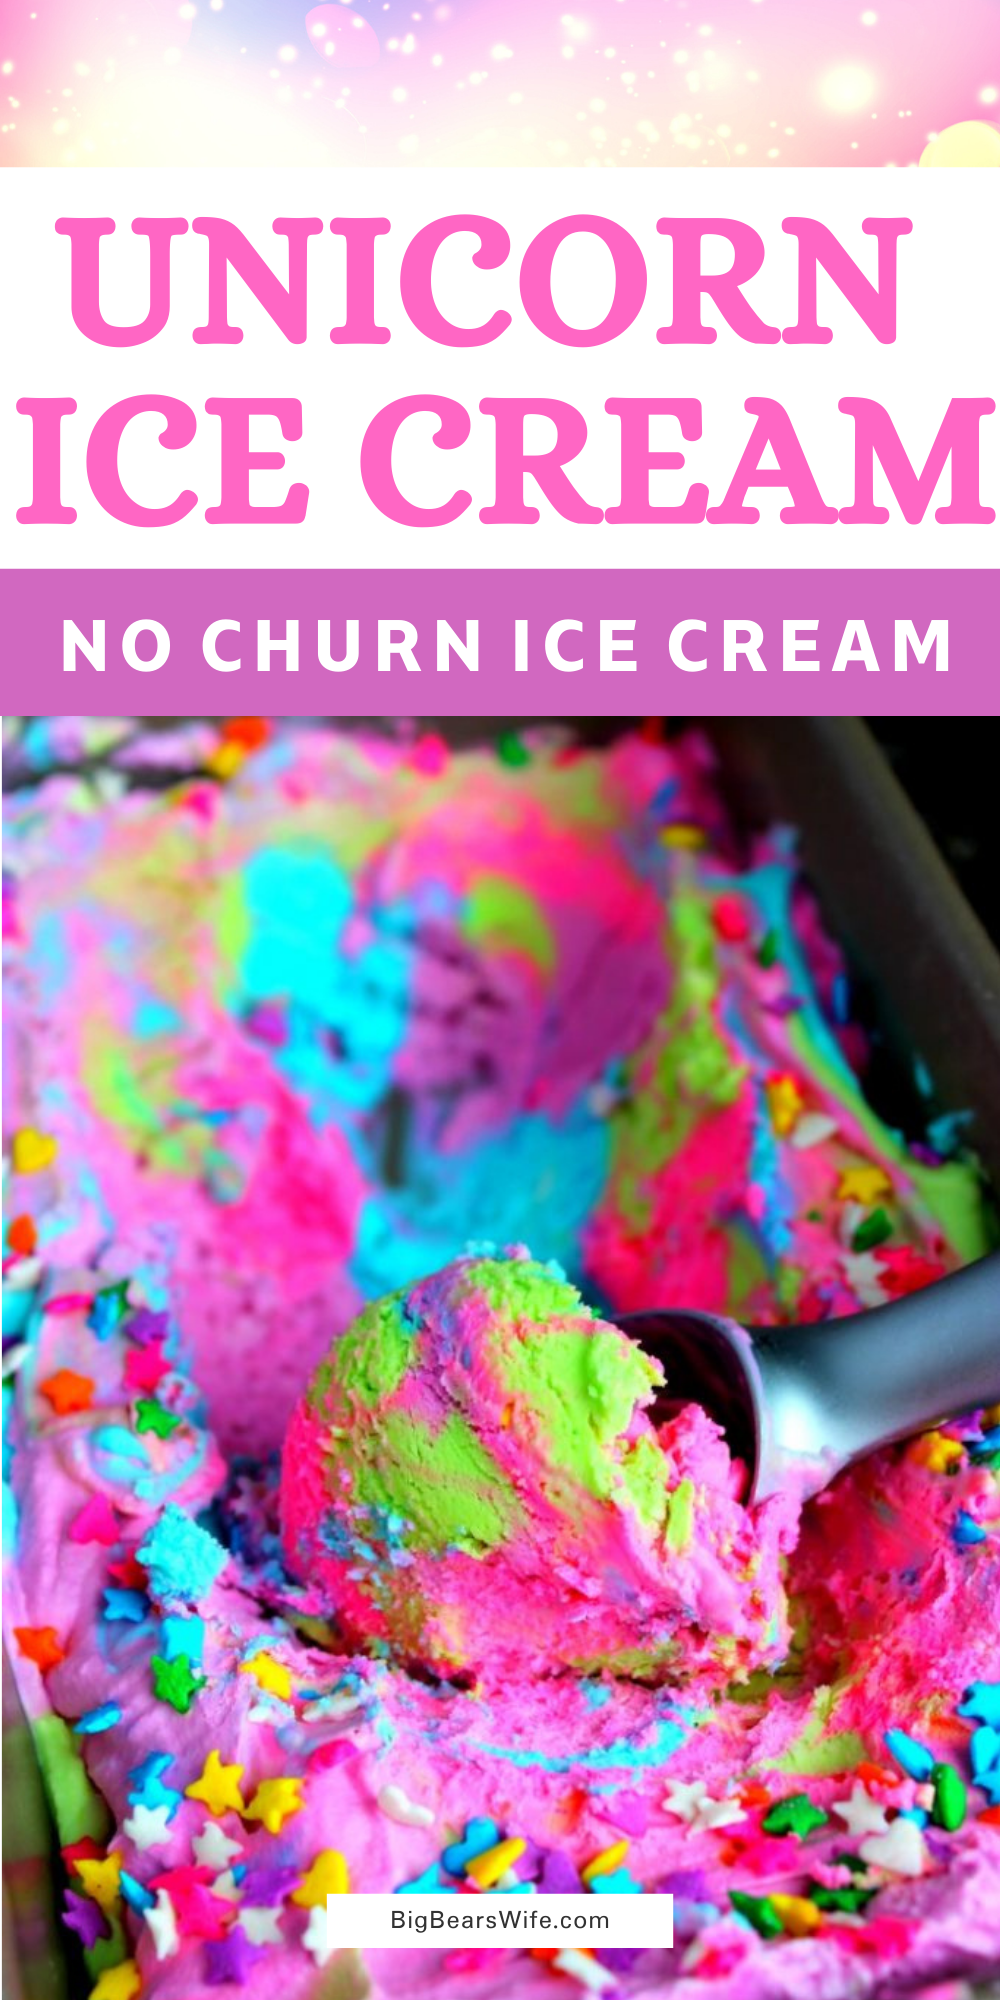 Sometimes you just need something a little wild and crazy like Unicorn Ice Cream to make you smile! Ps. this is Unicorn Ice Cream is a No Churn Ice Cream! via @bigbearswife